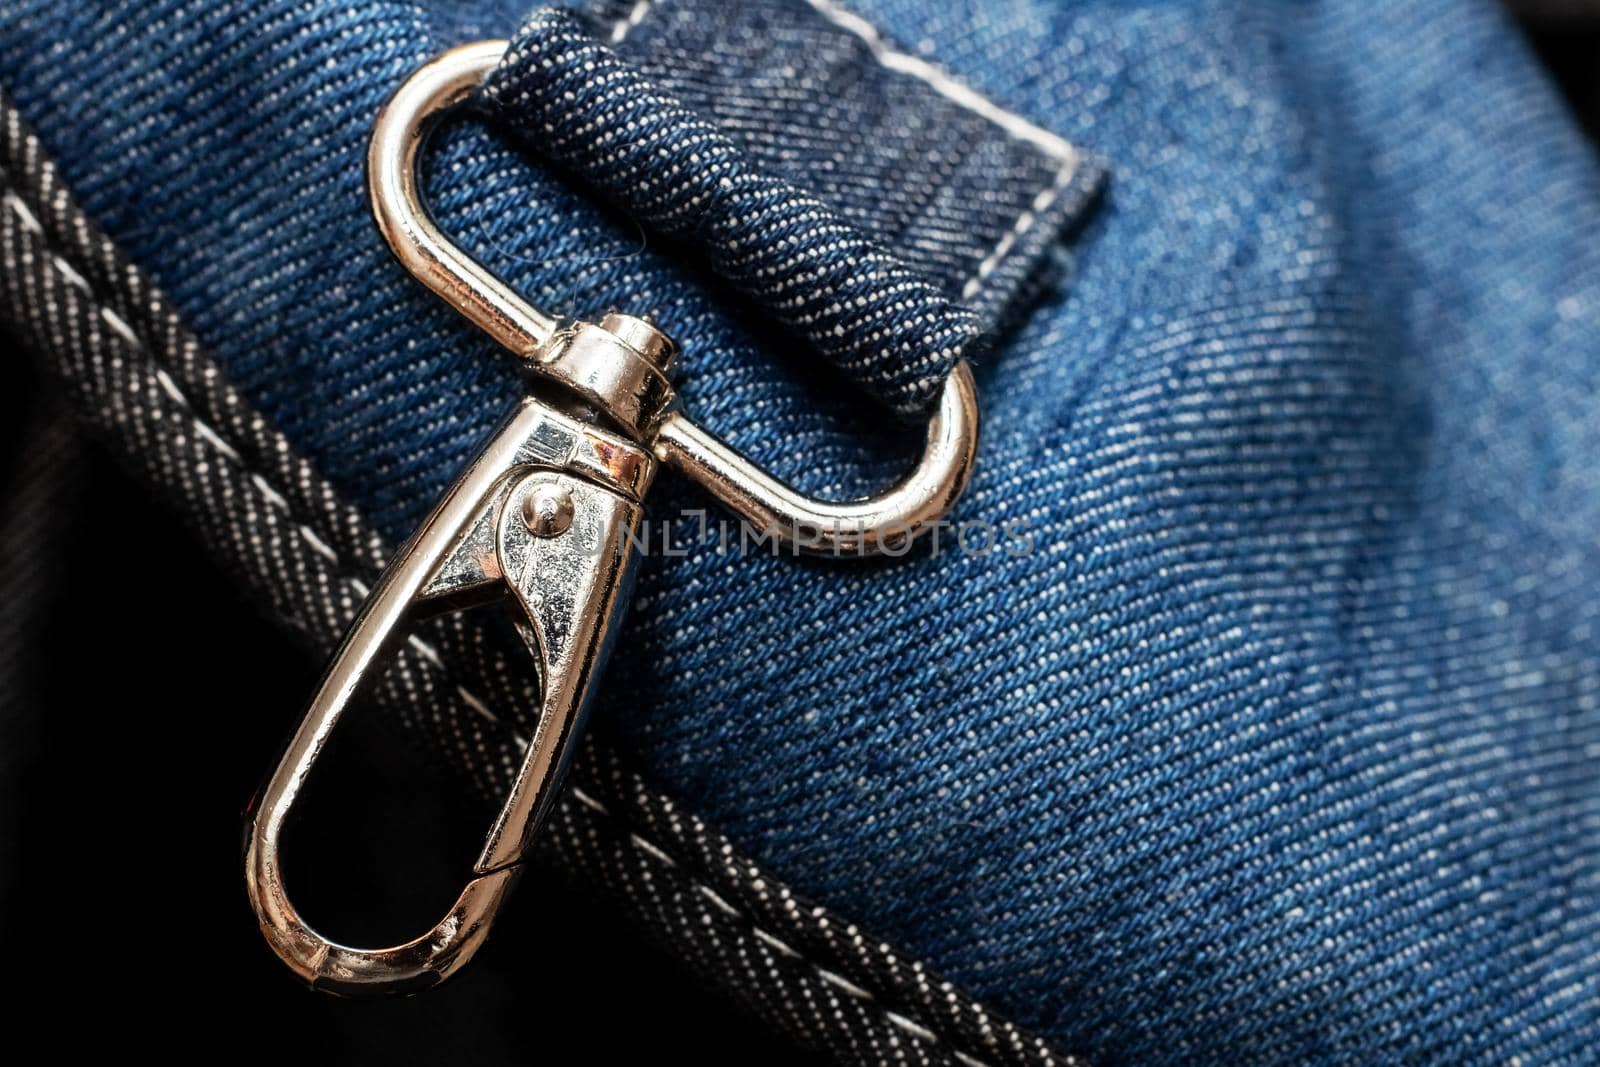 Metal buckle on a blue denim backpack close up, copy space